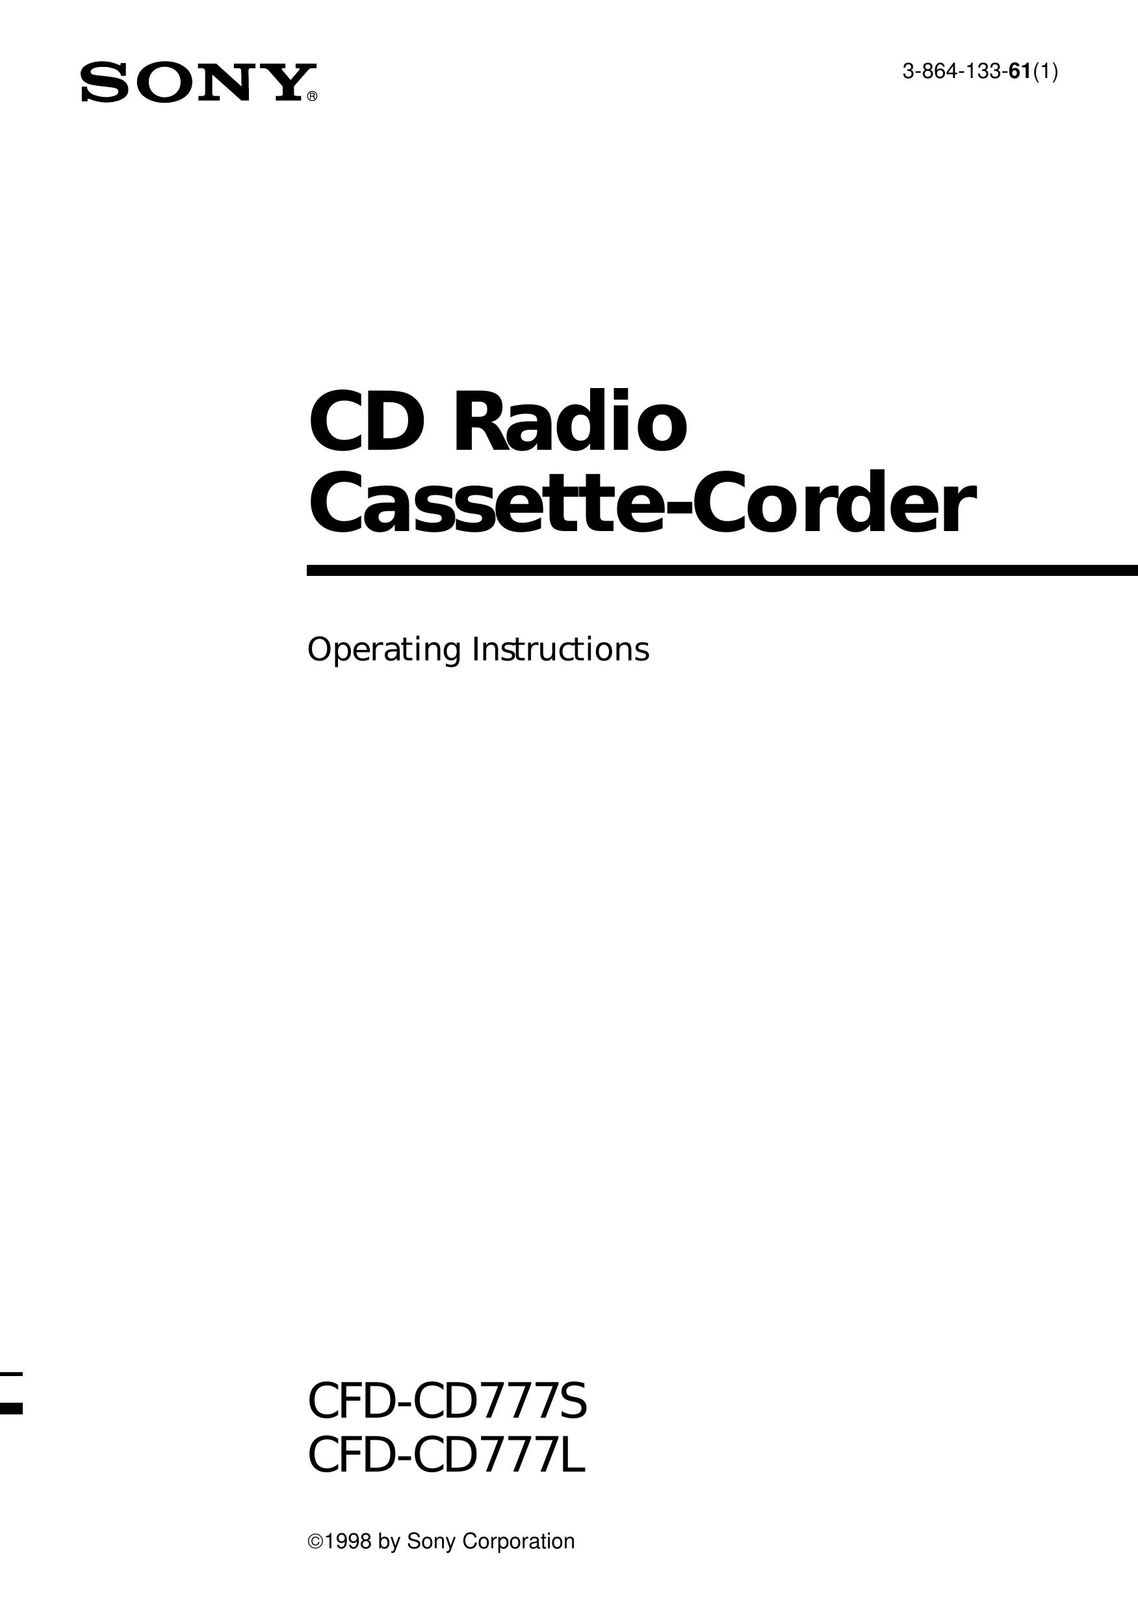 Sony CFD-CD777L Cassette Player User Manual